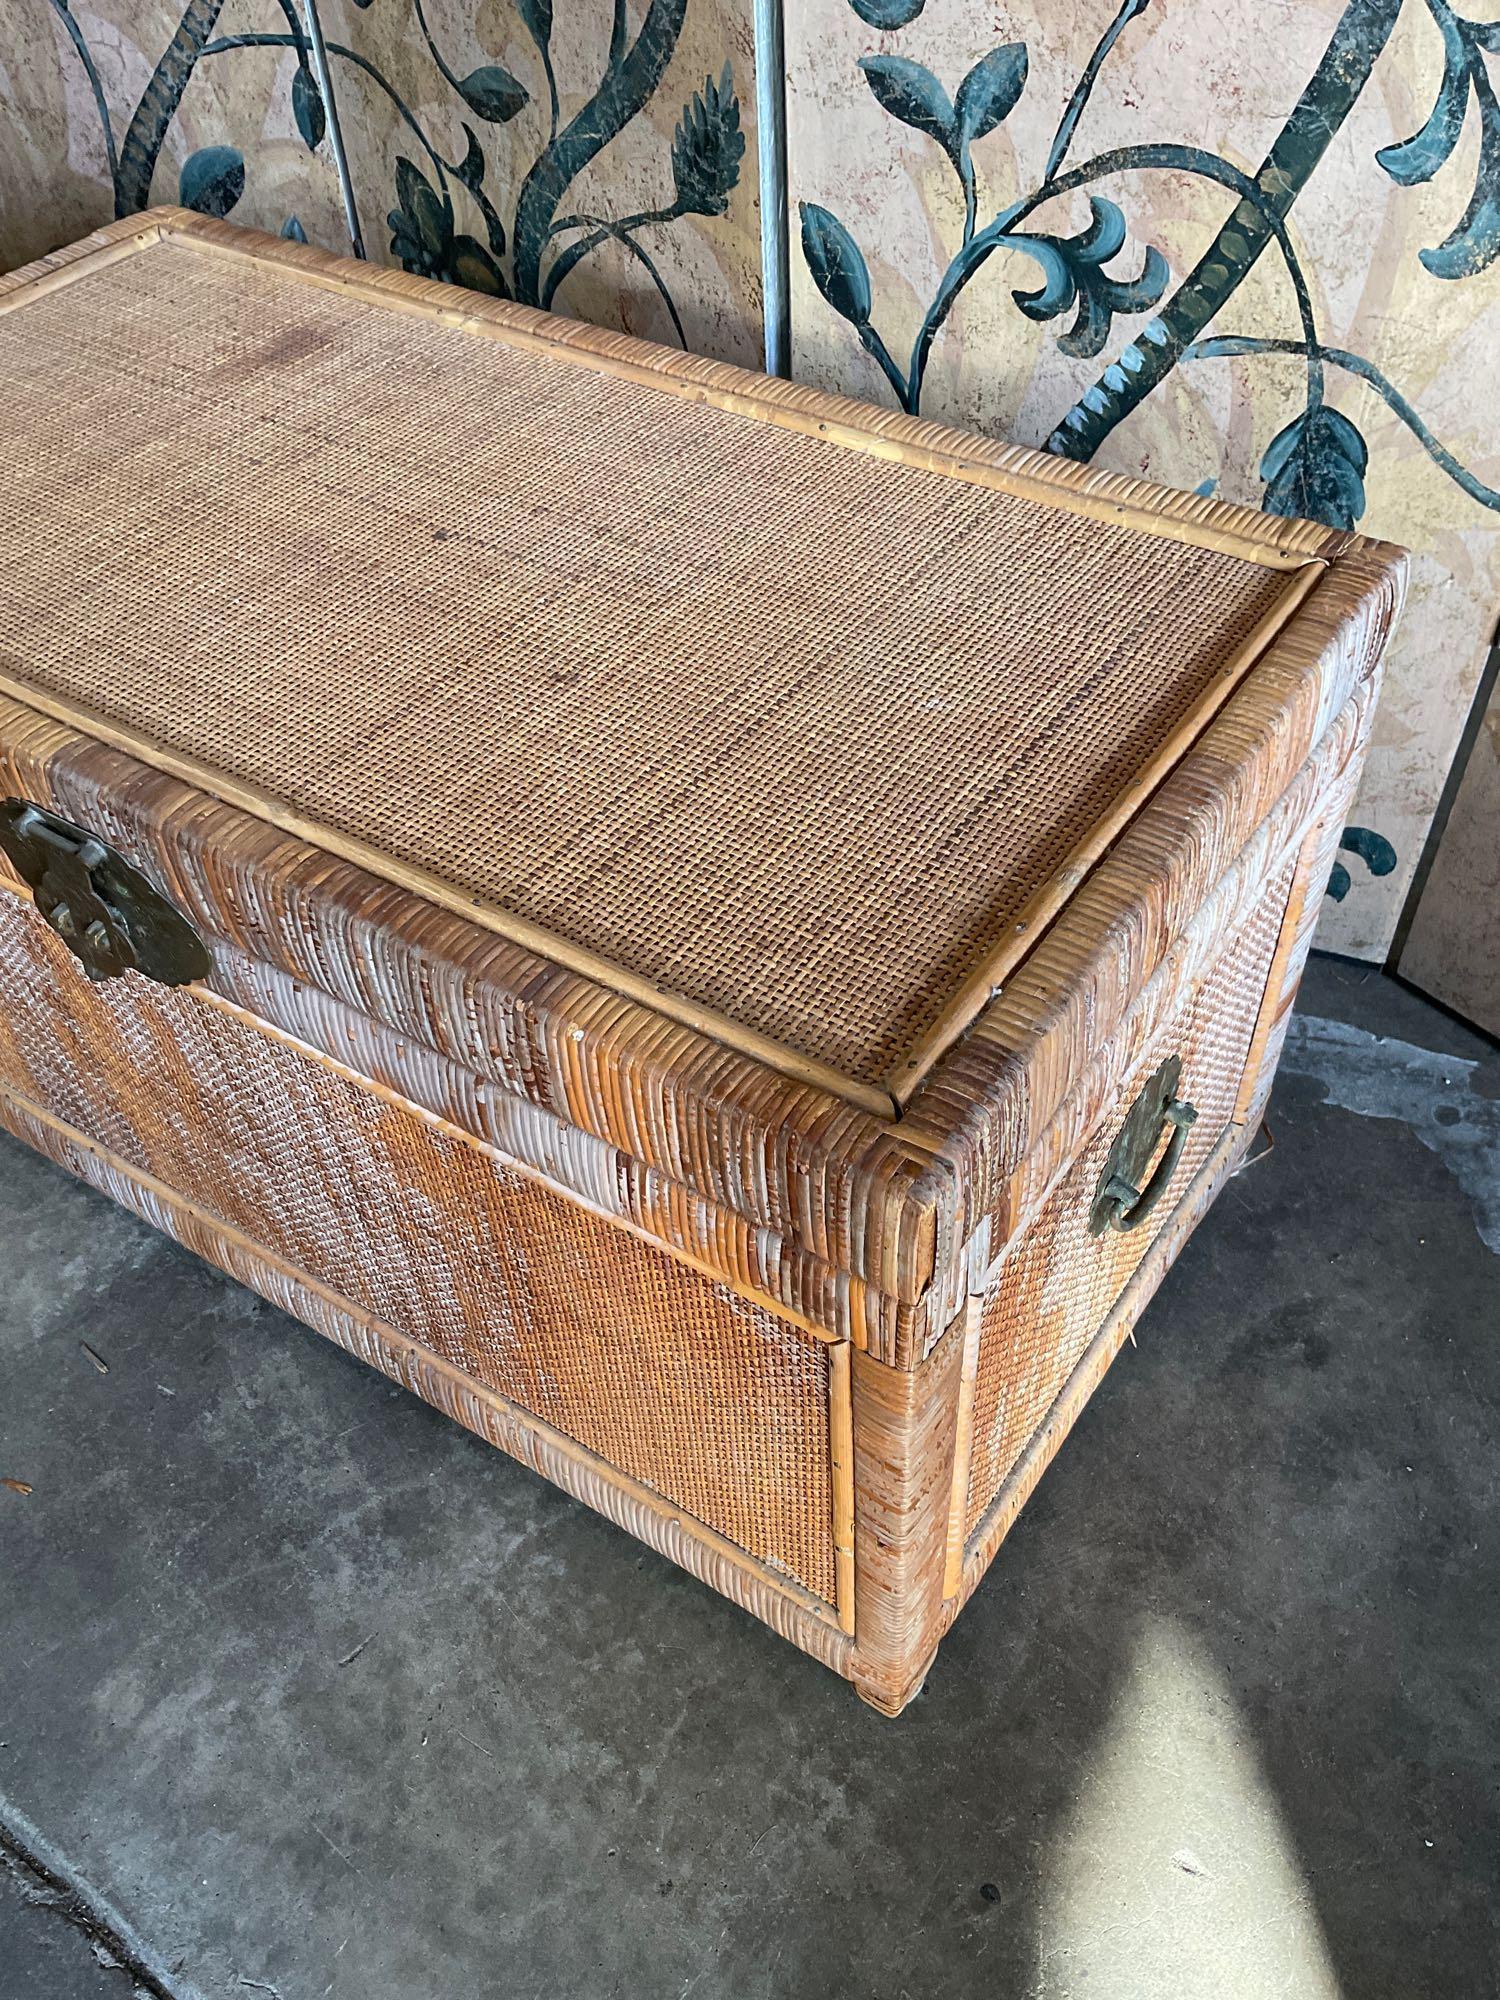 Vintage wicker trunk with metal accents. 16" T. 31" W x 16"D